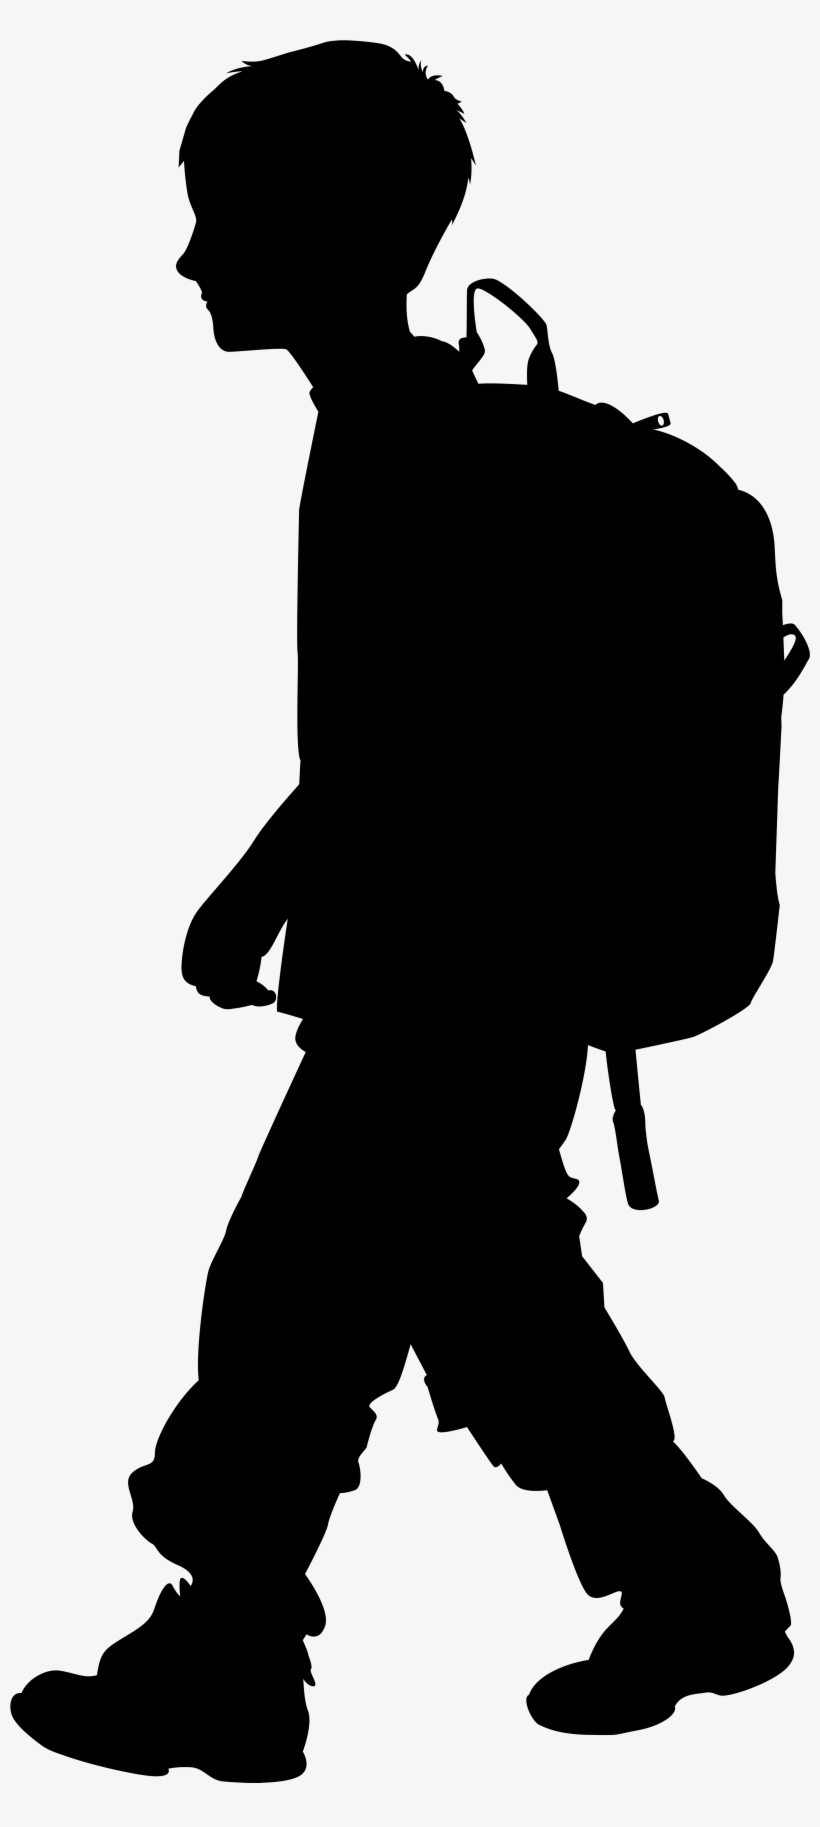 Image Download With Backpack Png Clip Art Image Gallery - Boy Silhouette Png, transparent png #134175